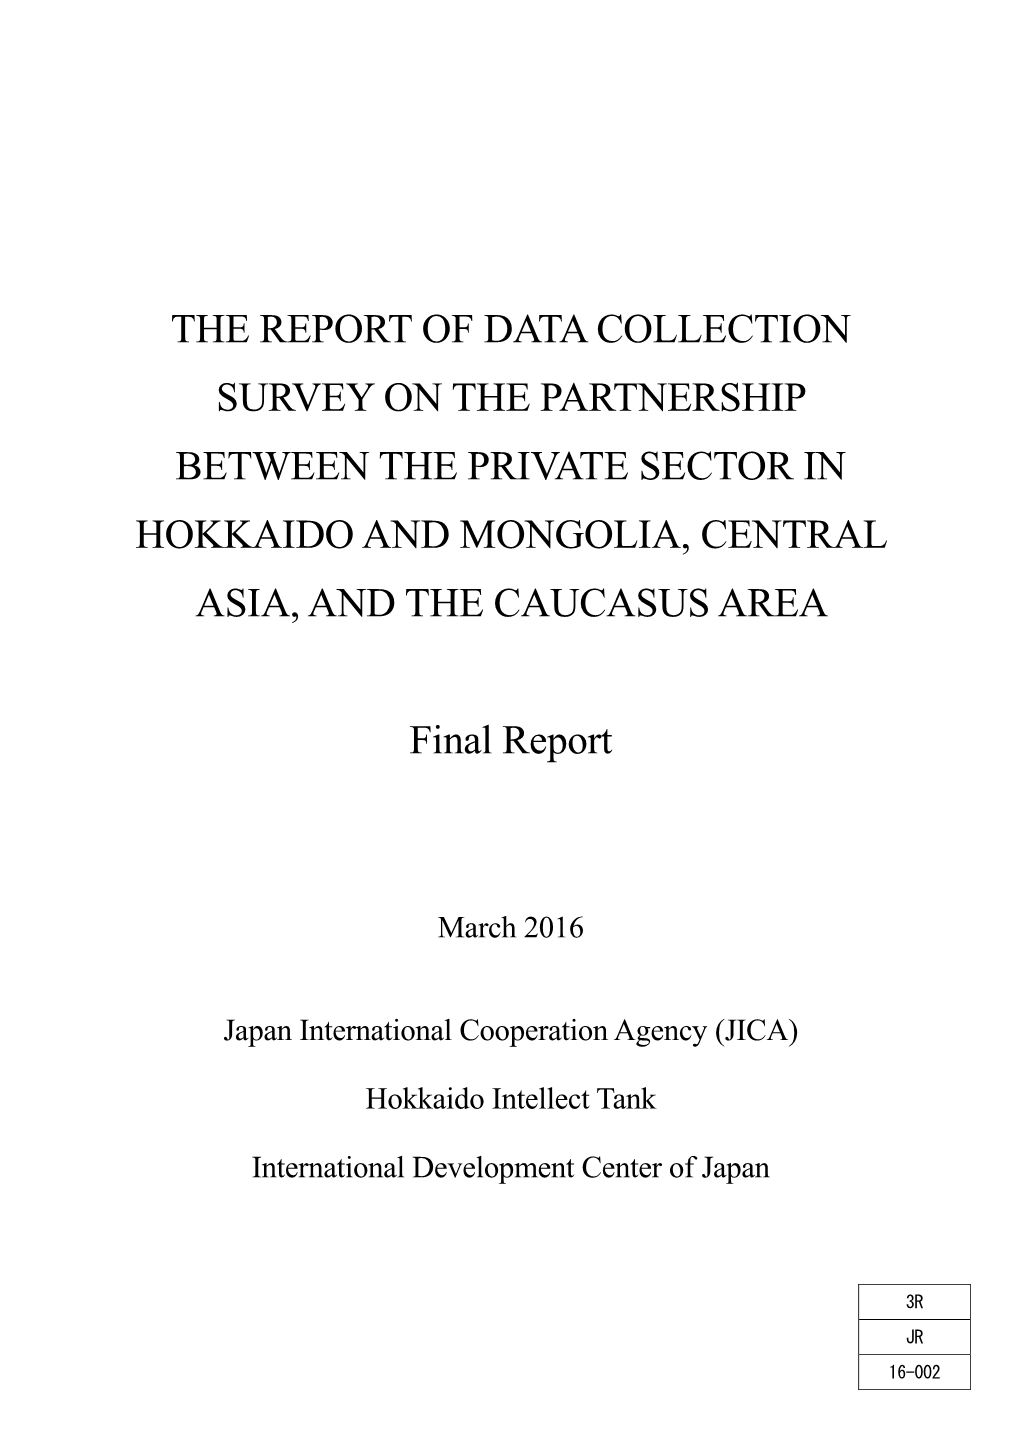 The Report of Data Collection Survey on the Partnership Between the Private Sector in Hokkaido and Mongolia, Central Asia, and the Caucasus Area